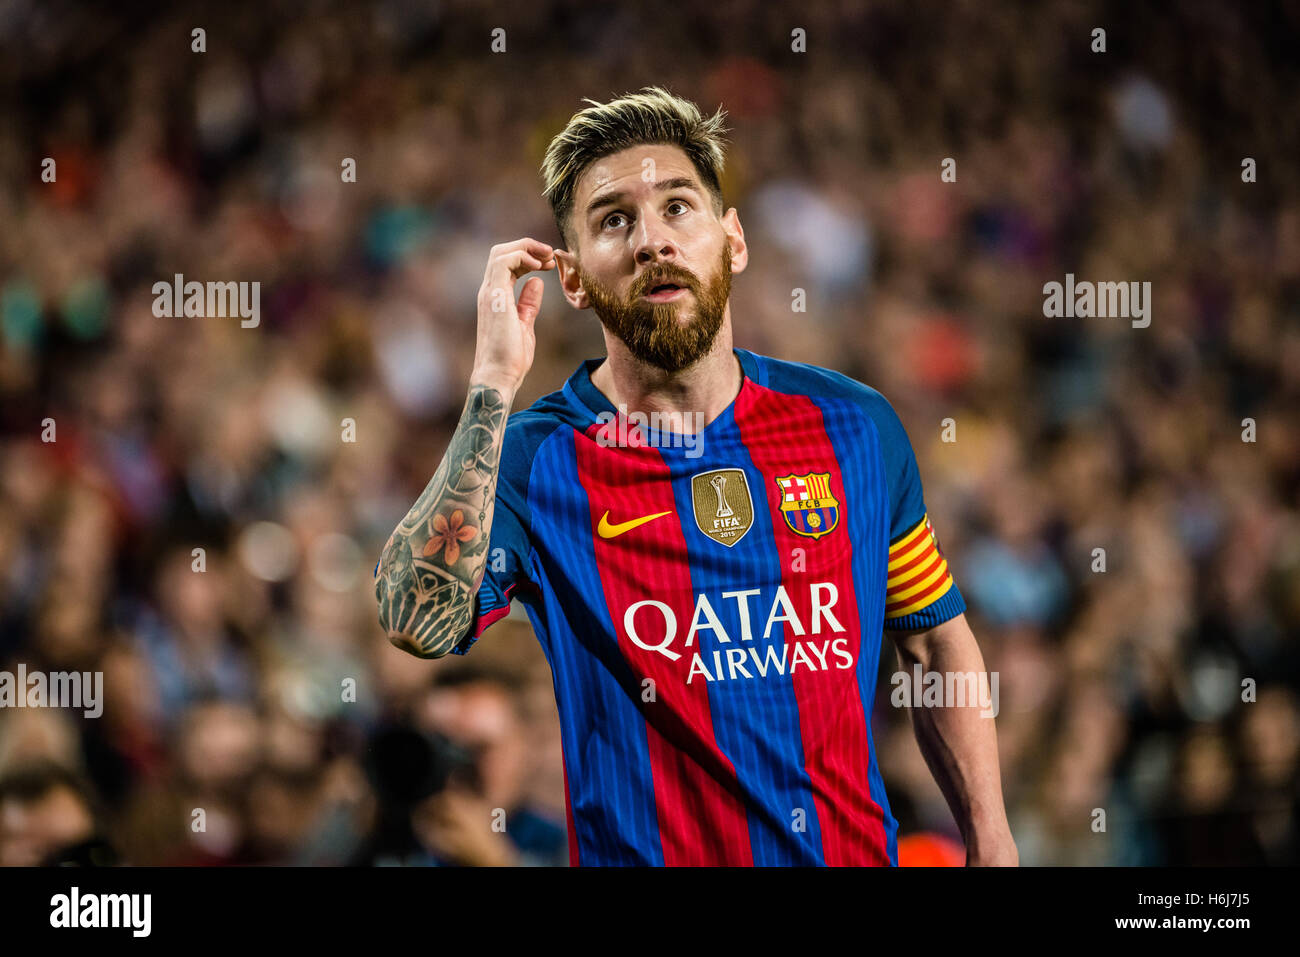 Barcelona, Catalonia, Spain. 29th Oct, 2016. FC Barcelona forward MESSI looks on during the LaLiga match between FC Barcelona and Granada CF at the Camp Nou stadium in Barcelona © Matthias Oesterle/ZUMA Wire/Alamy Live News Stock Photo